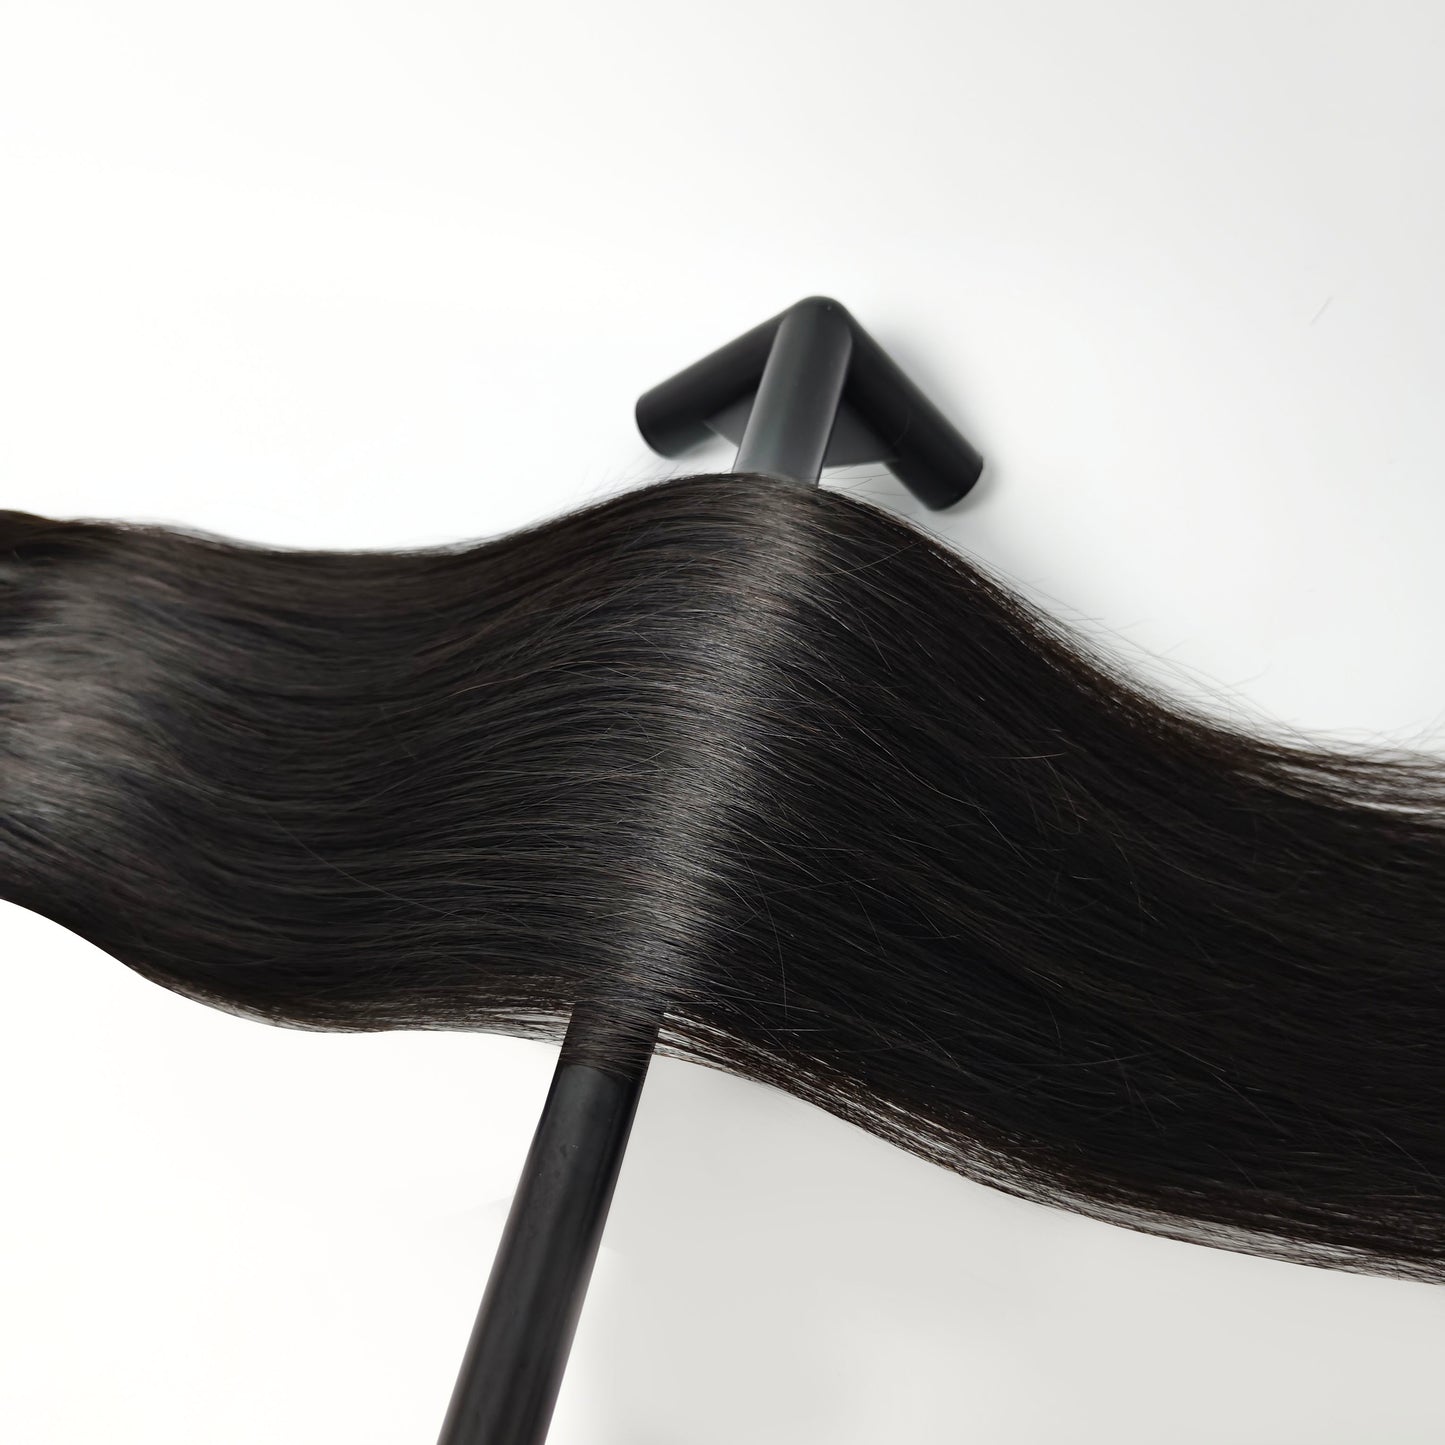 Straight Virgin Human Hair Extensions with 3 Years Life Time